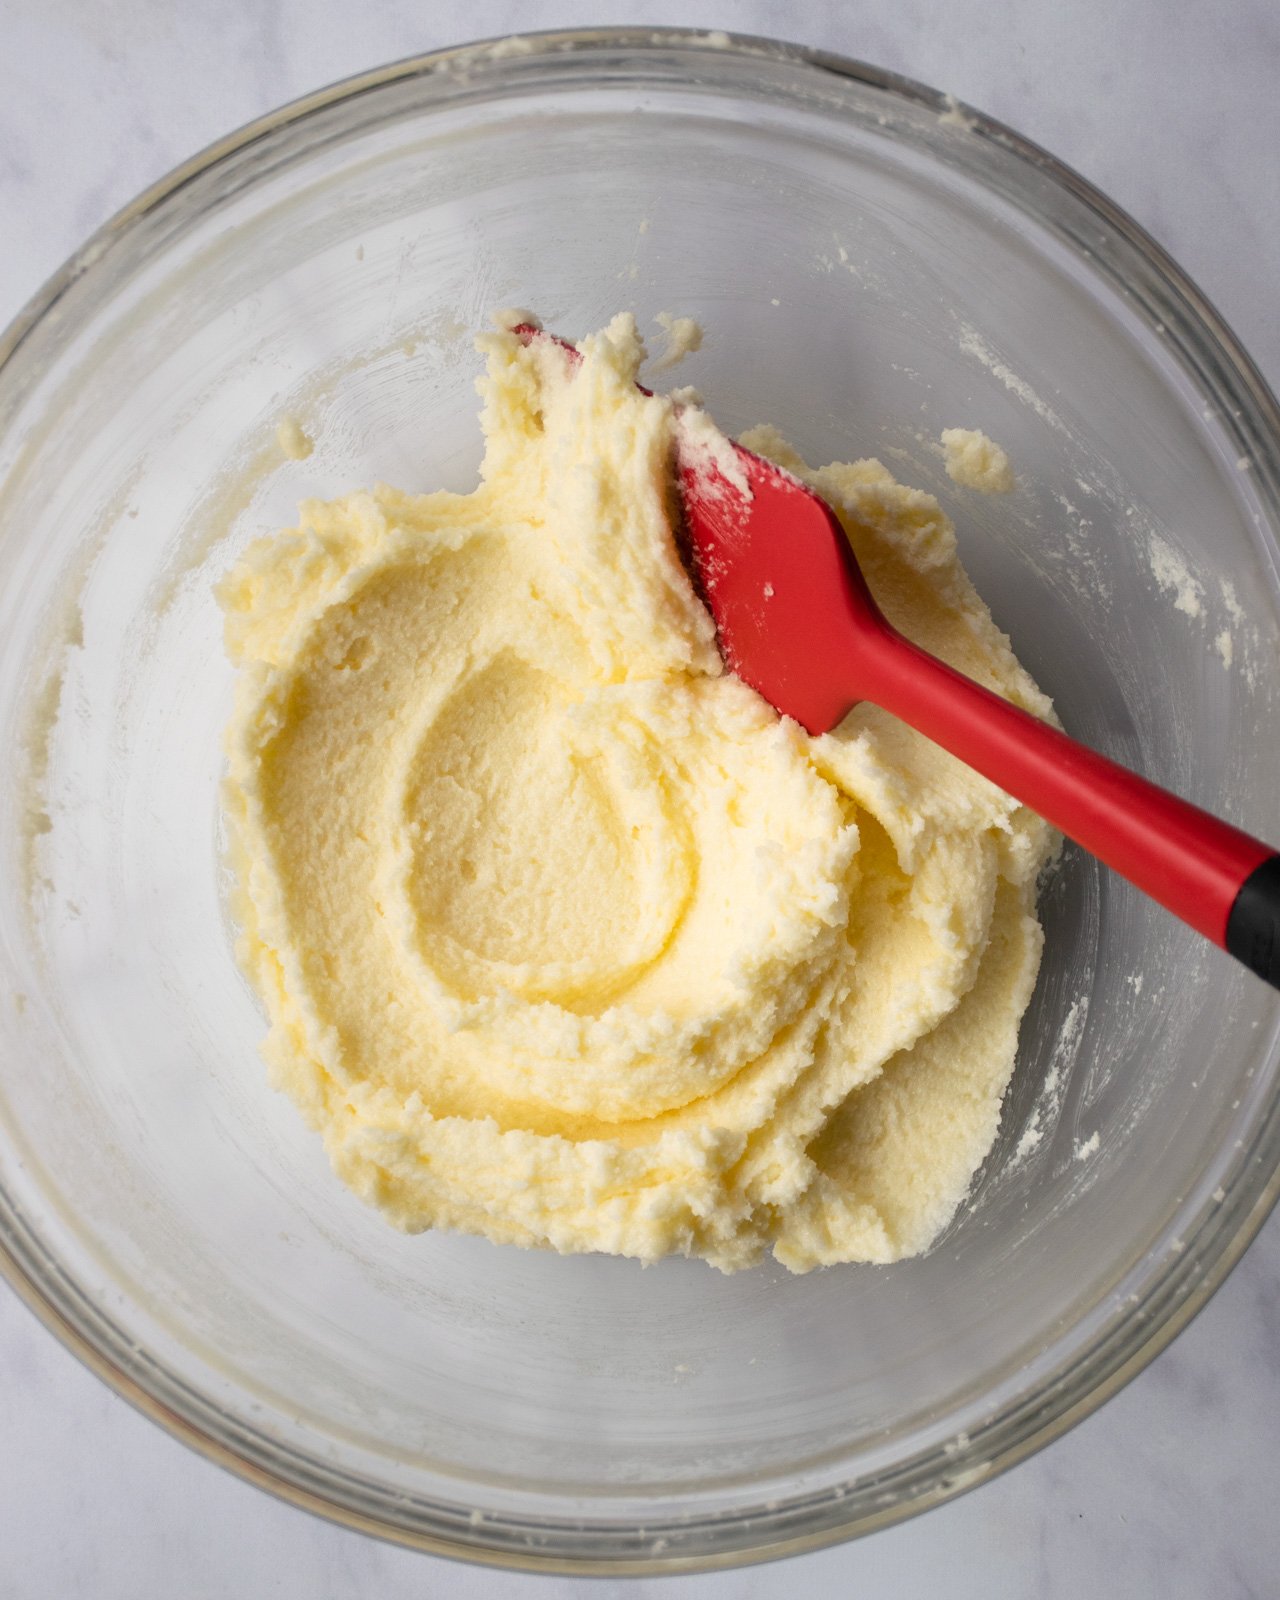 How to Cream Butter and Sugar - Always Eat Dessert